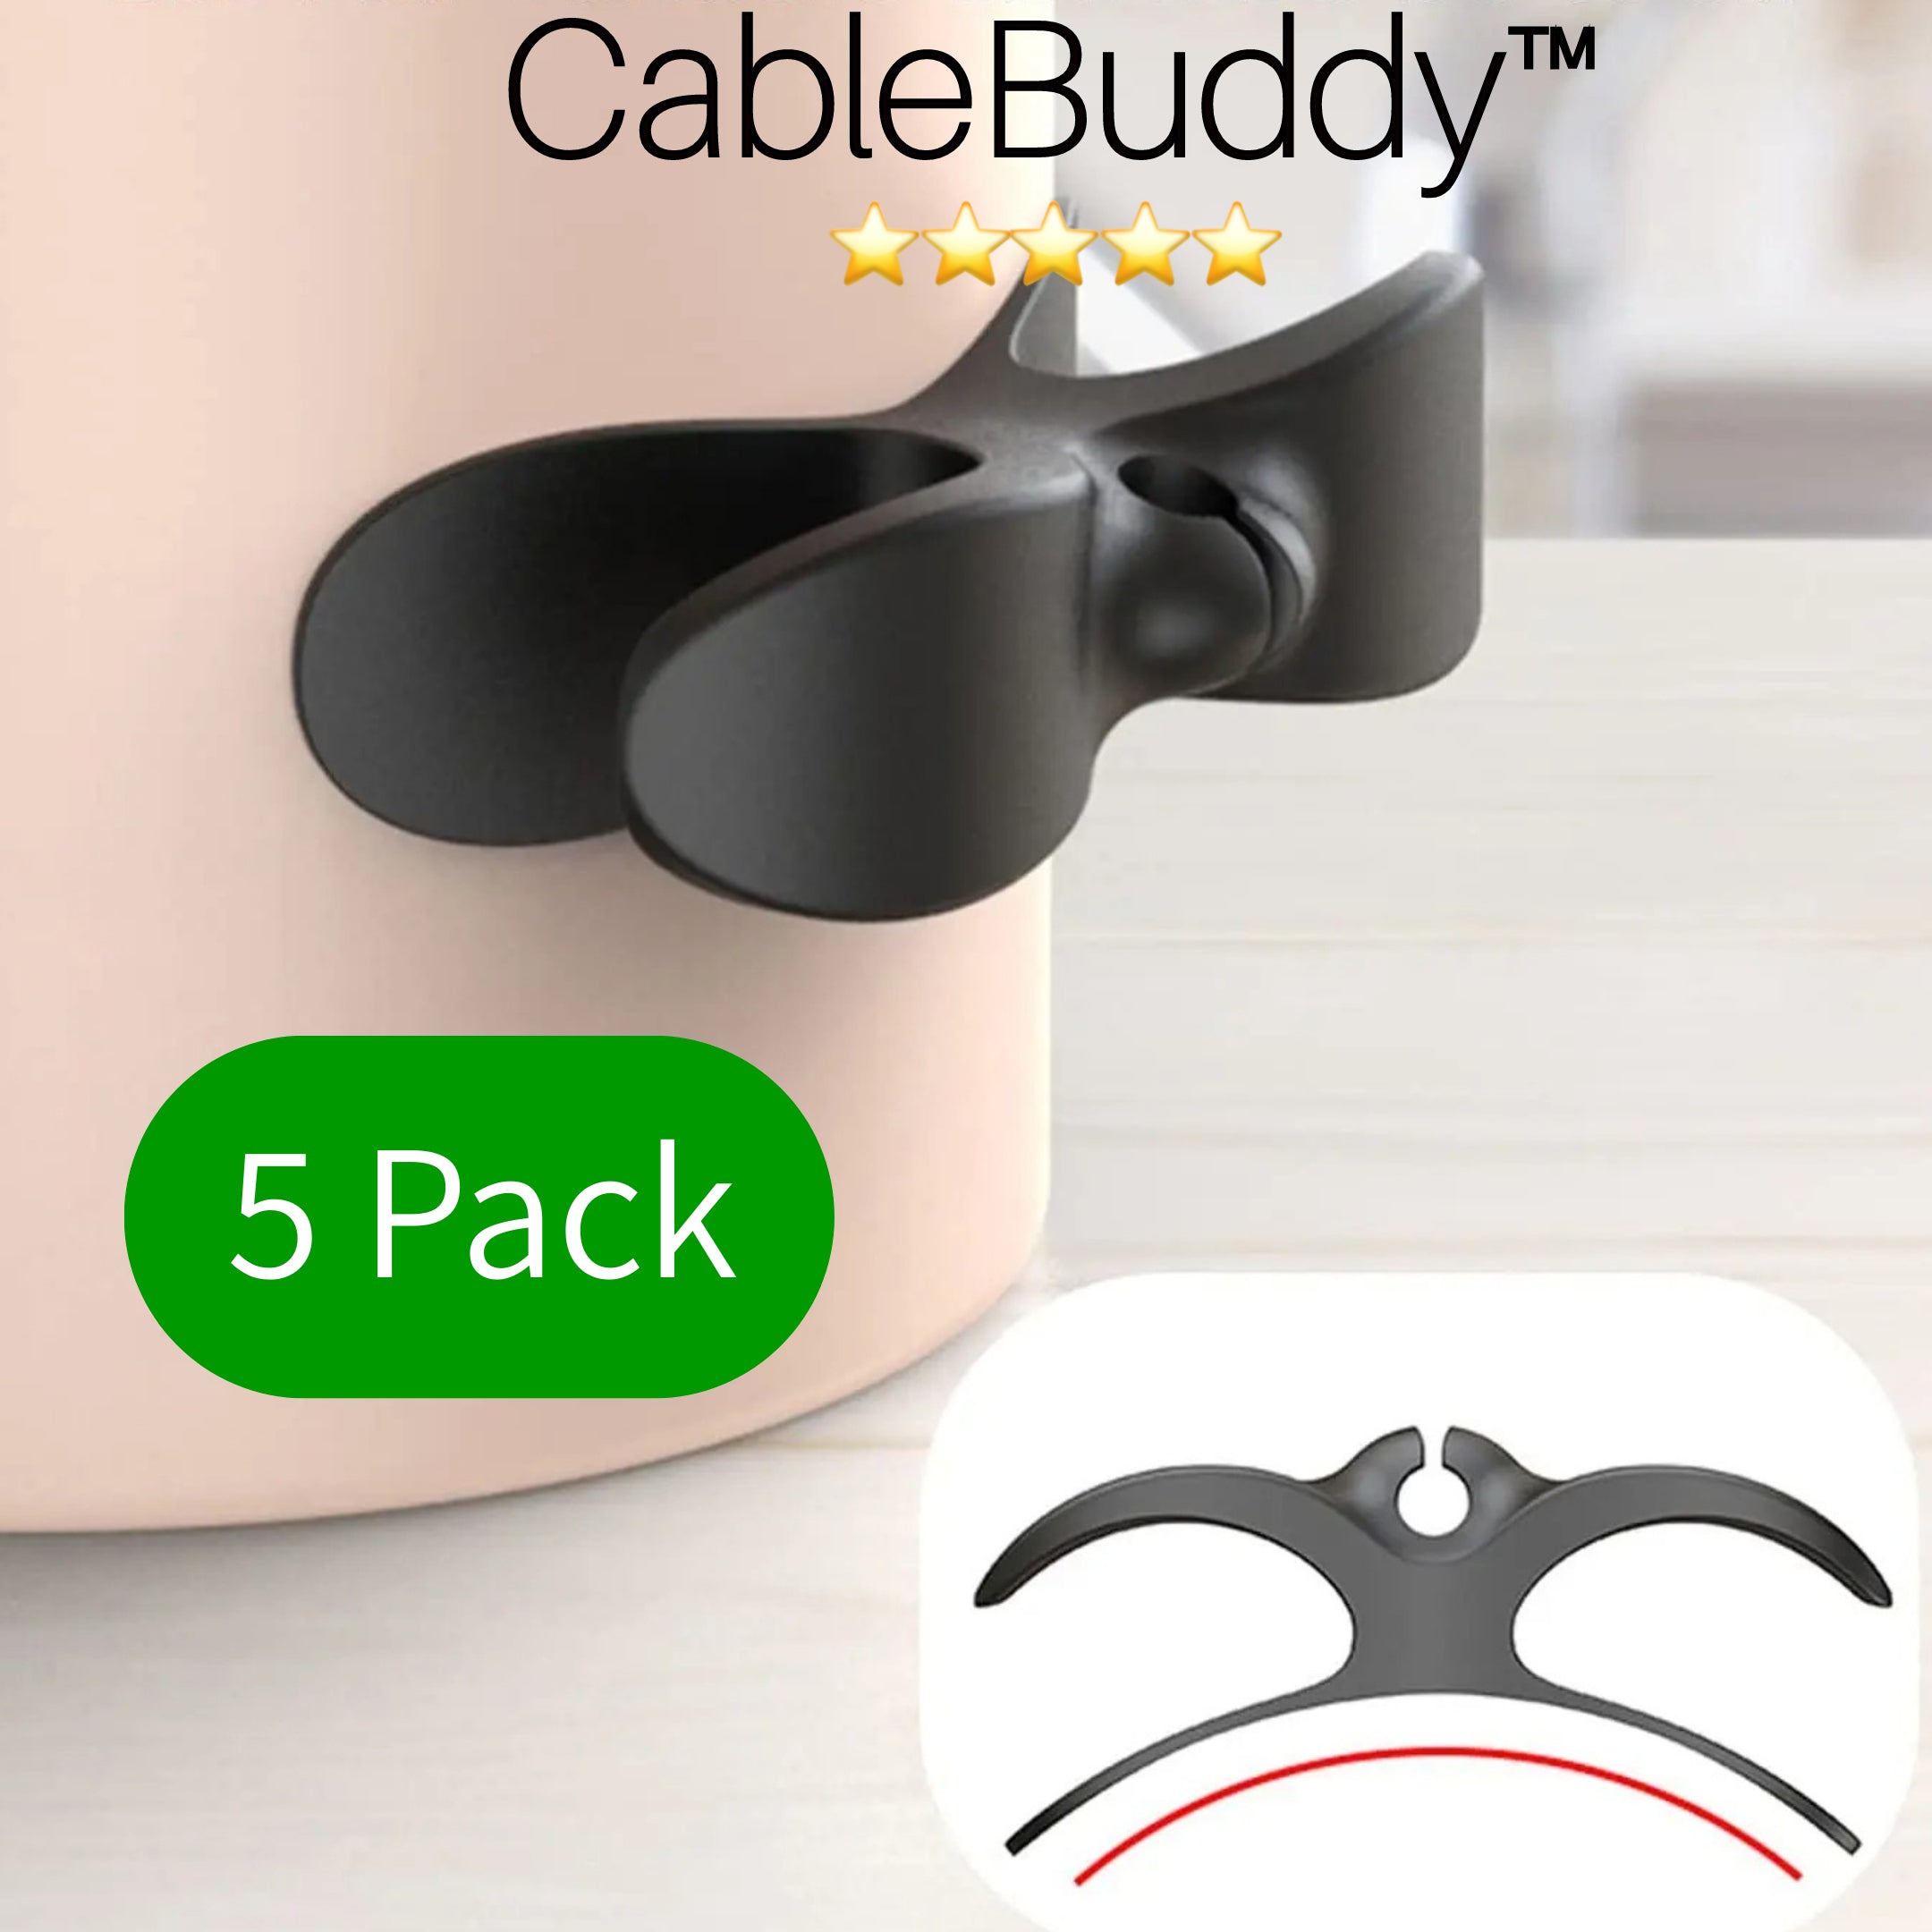 CableBuddy™ Adhesive Cable Tidy - Packs Of 5